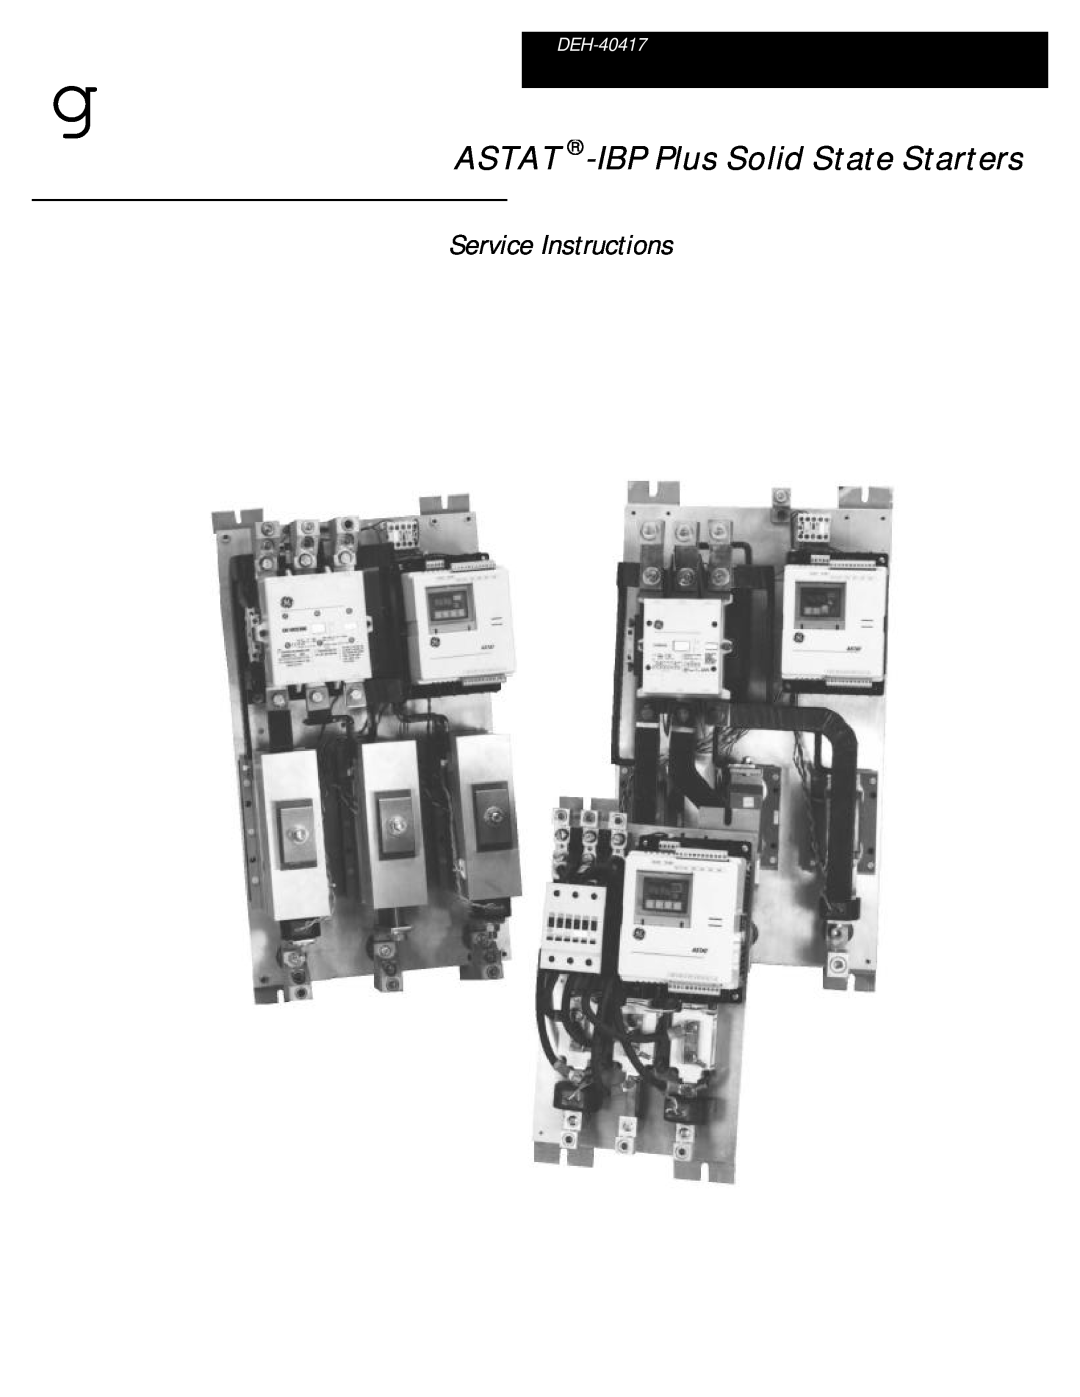 GE DEH-40417 manual ASTAT -IBP Plus Solid State Starters, Service Instructions 